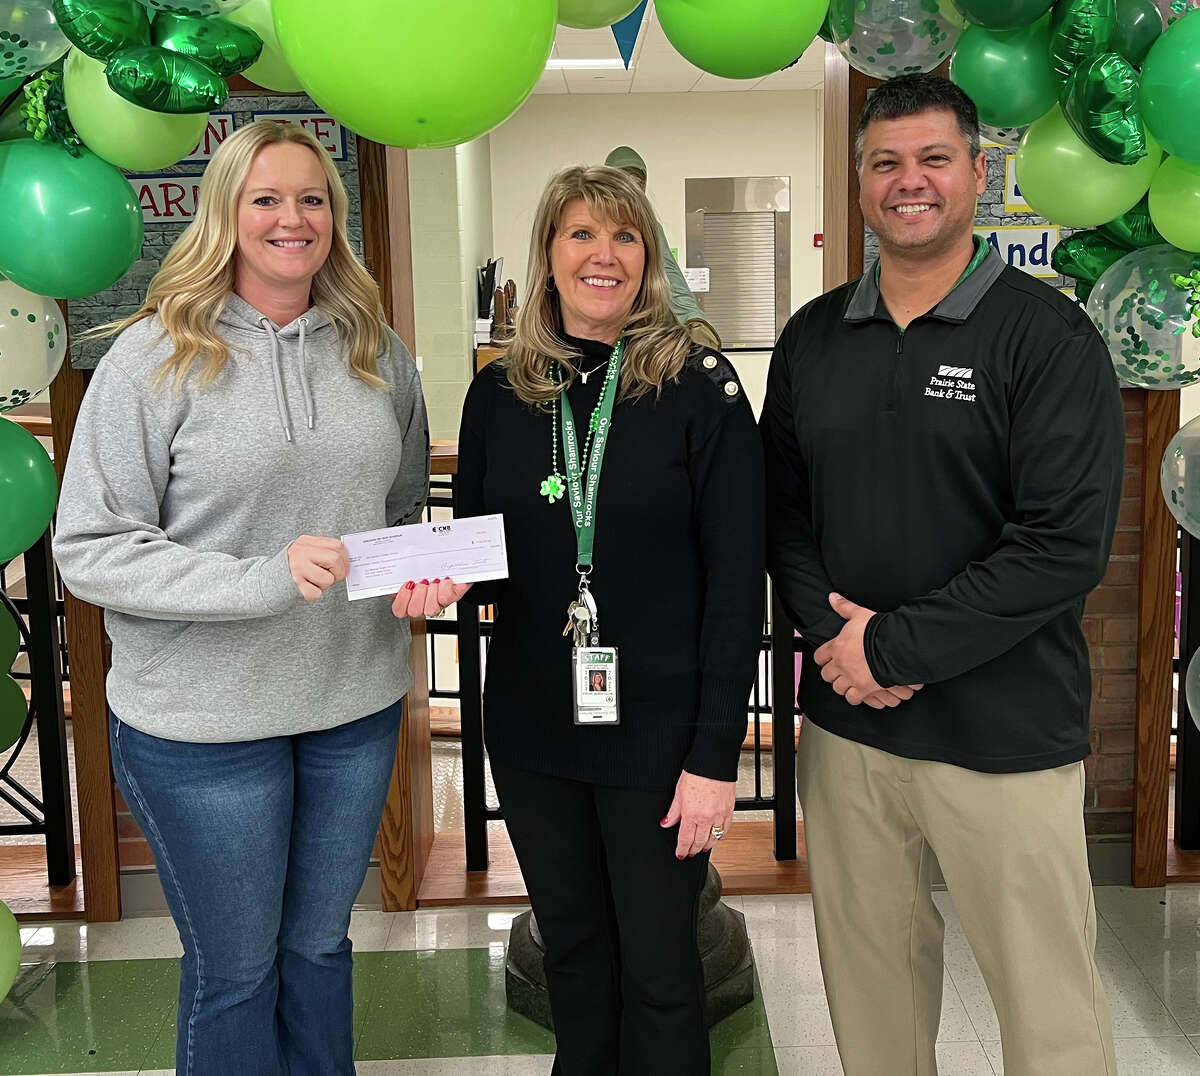 Stacy Bradshaw (left), co-chair of the 2021 Dreams campaign to benefit Routt Catholic High School and Our Saviour School, and Joe Horabik (right), the campaign’s chair, present Our Saviour School Principal Stevie VanDeVelde a $120,000 check representing a portion of the campaign’s proceeds.